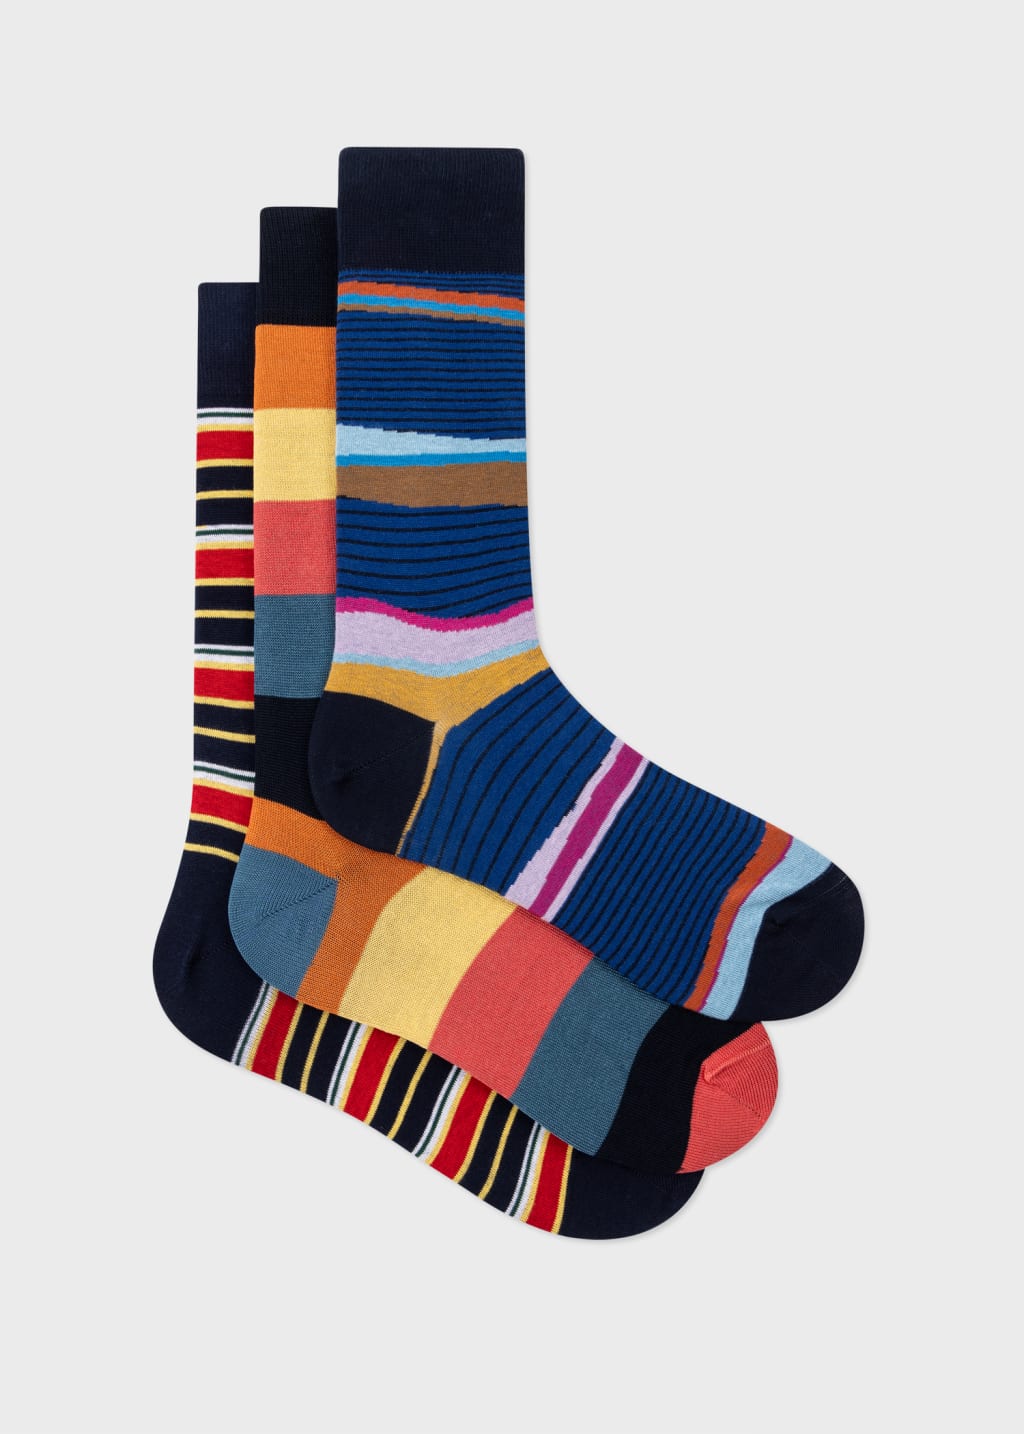 Front View - Stripe Socks Three Pack Paul Smith